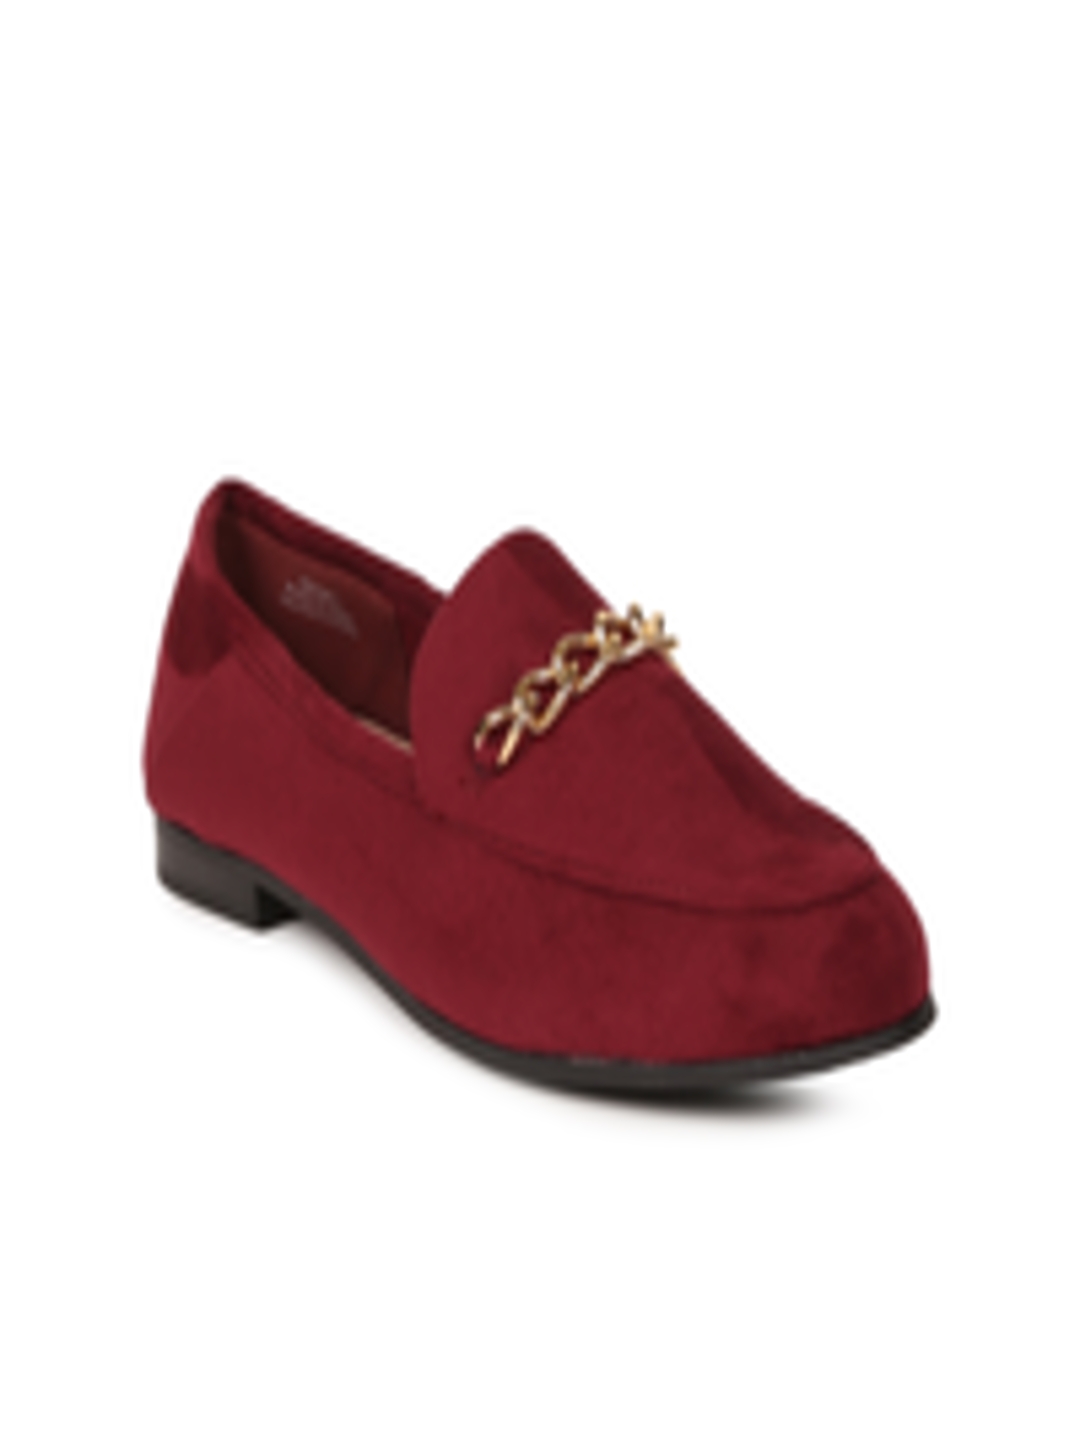 Buy FOREVER 21 Women Burgundy Loafers - Casual Shoes for Women 2408035 ...